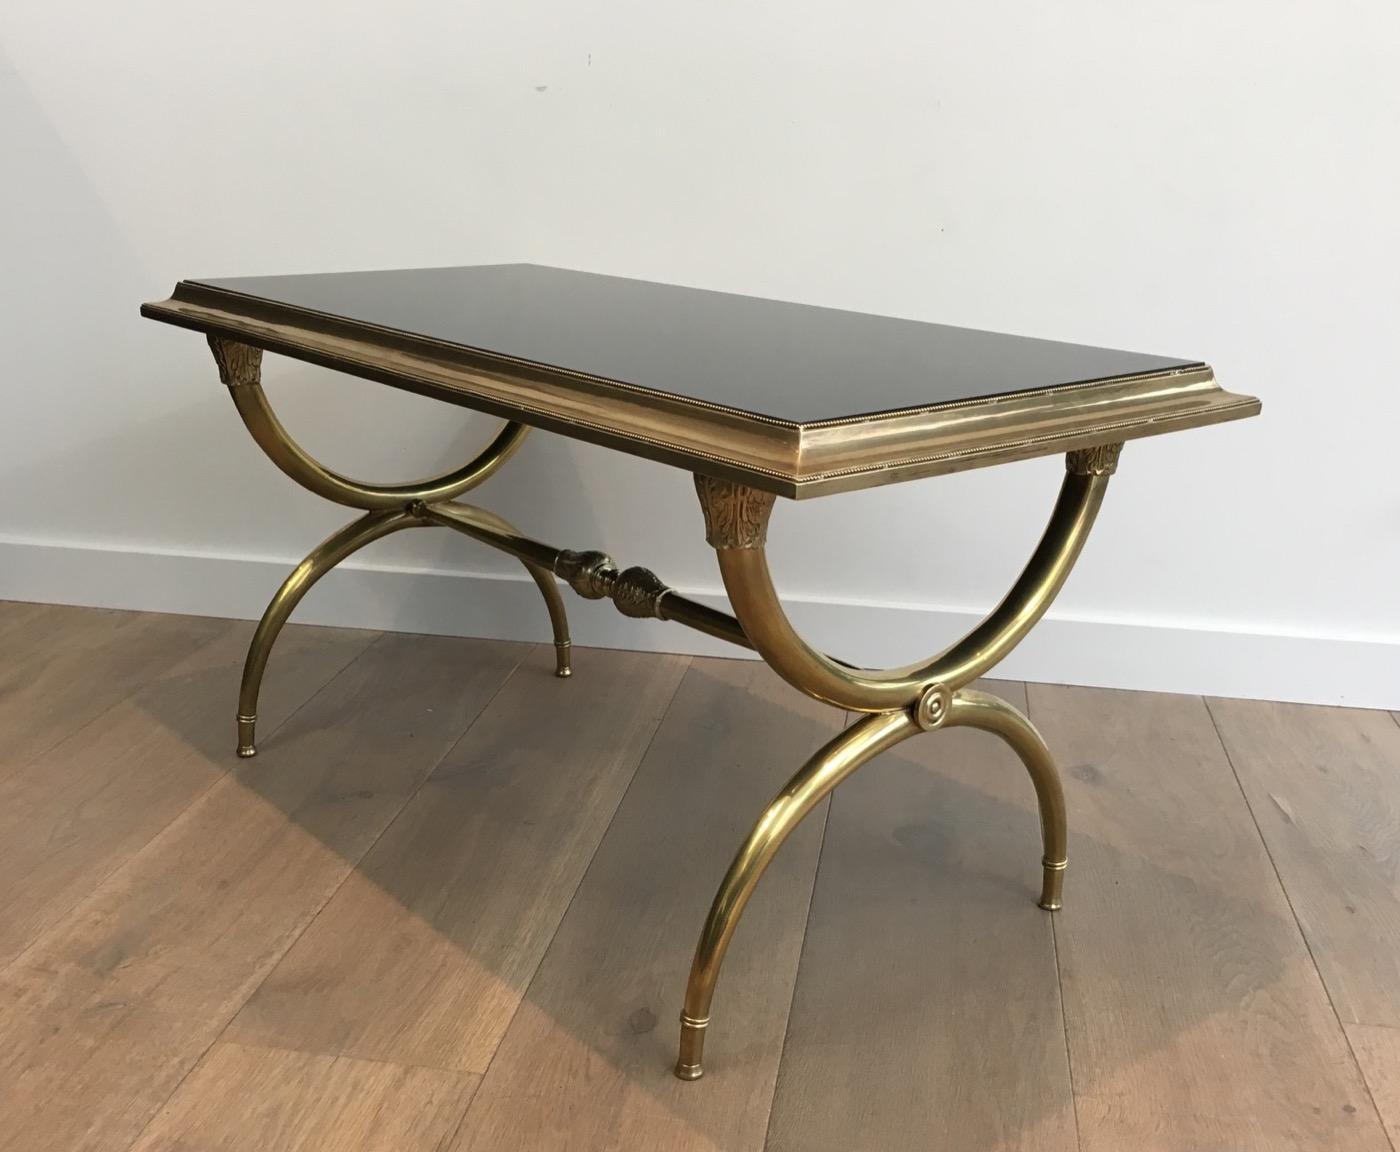 This very elegant neoclassical coffee table is made of a heavy bronze and brass base with a black lacquered glass shelf on top. This is a Fine work, attributed to famous French designer Raymond Subes, circa 1940.